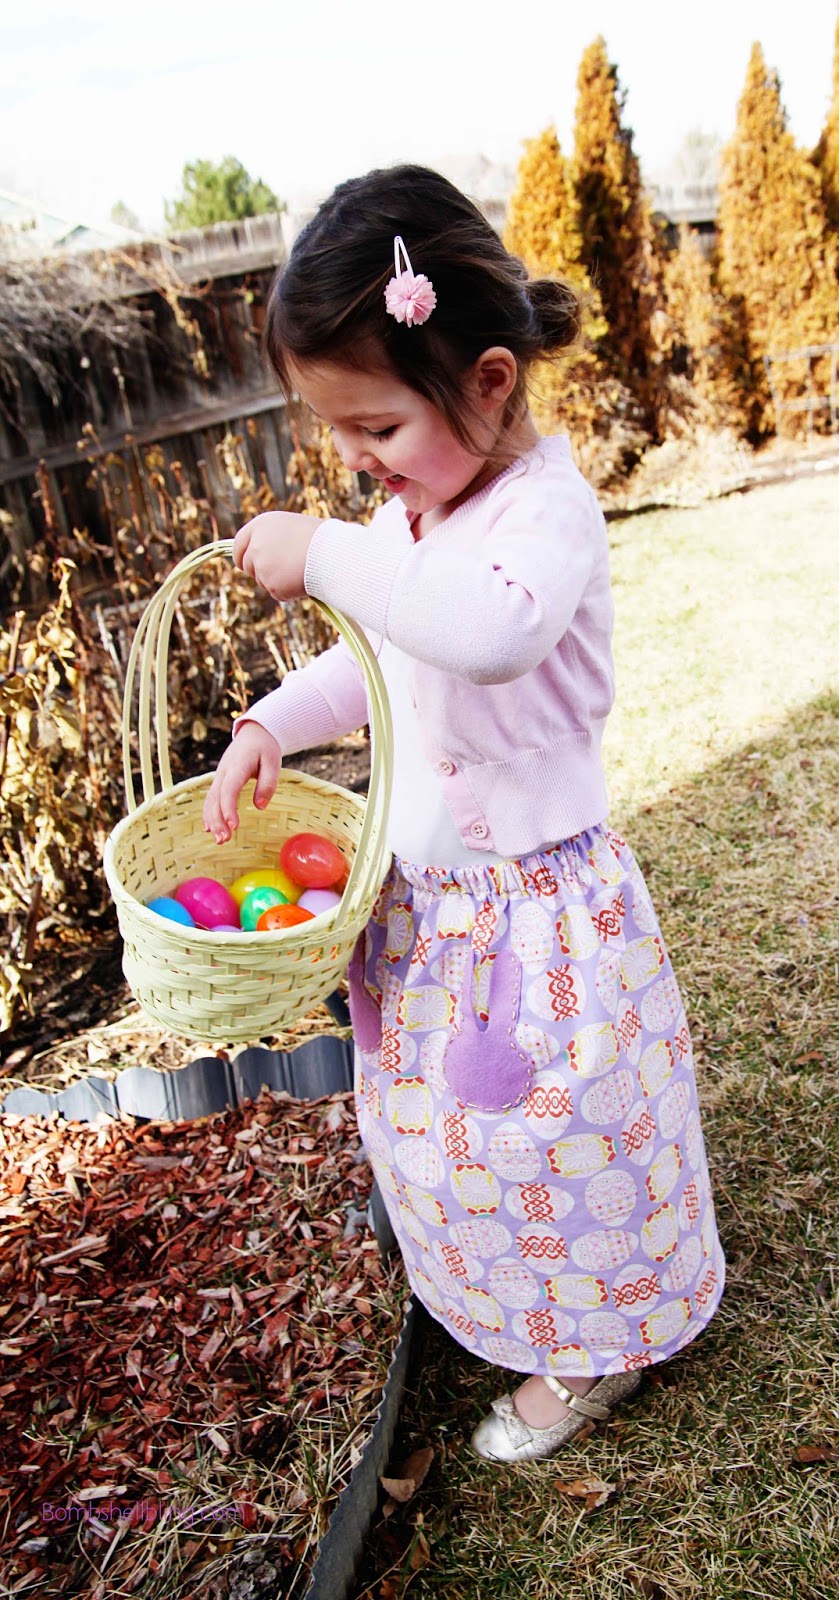 Make your little lady an Easter maxi skirt (or knee length skirt) with this simple sewing tutorial. I love the bunny pockets!